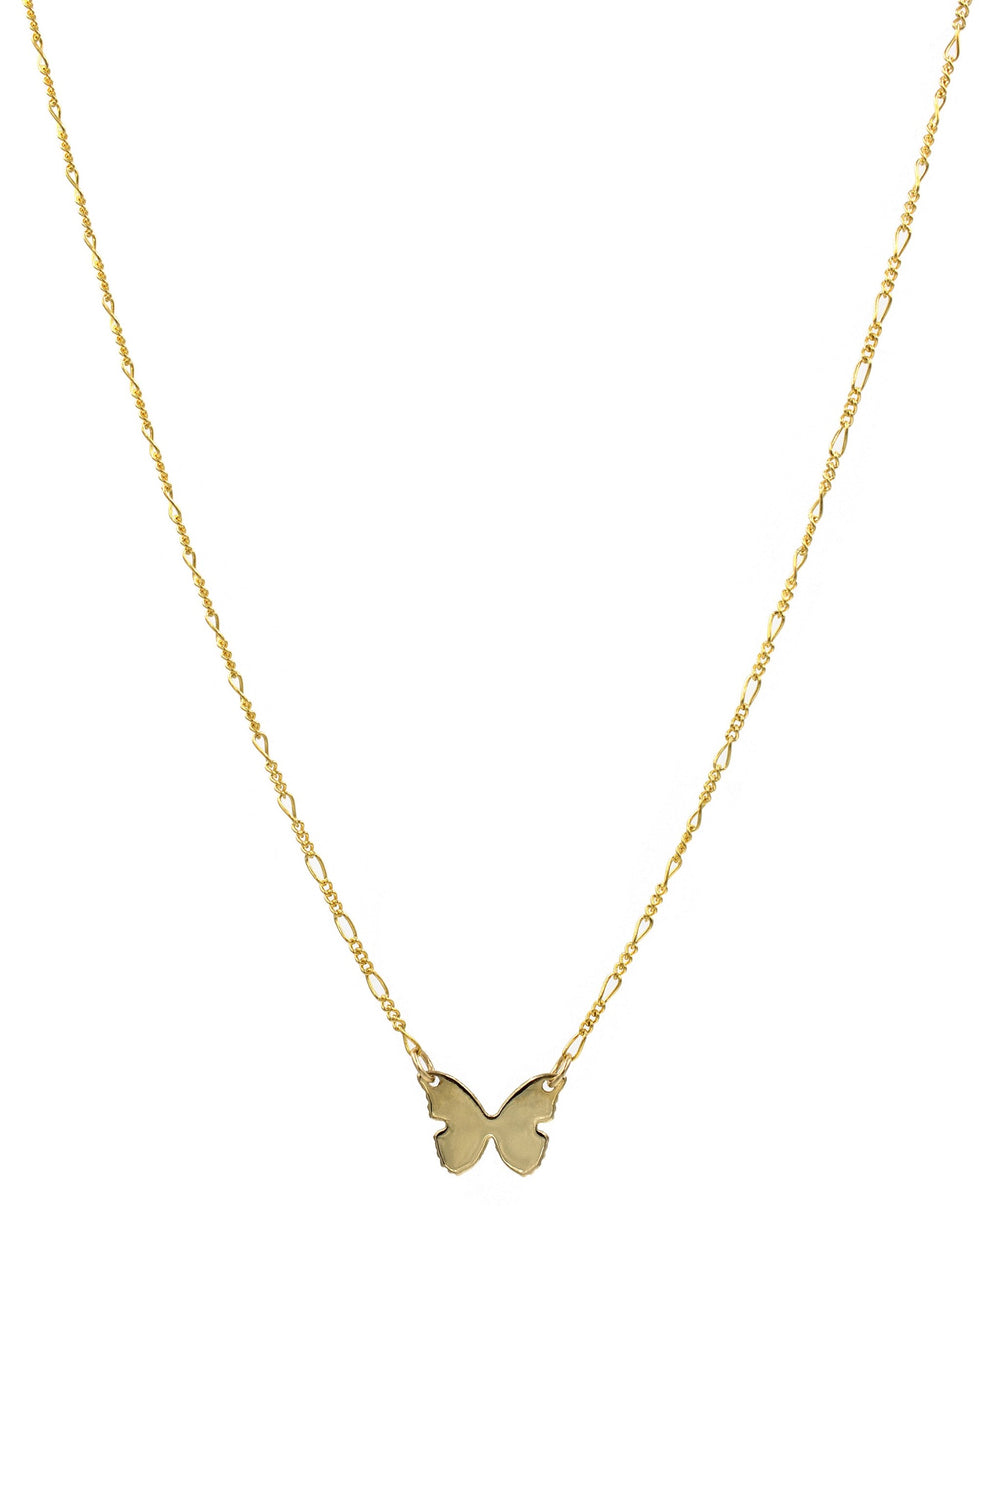 Gold Large Butterfly Necklace